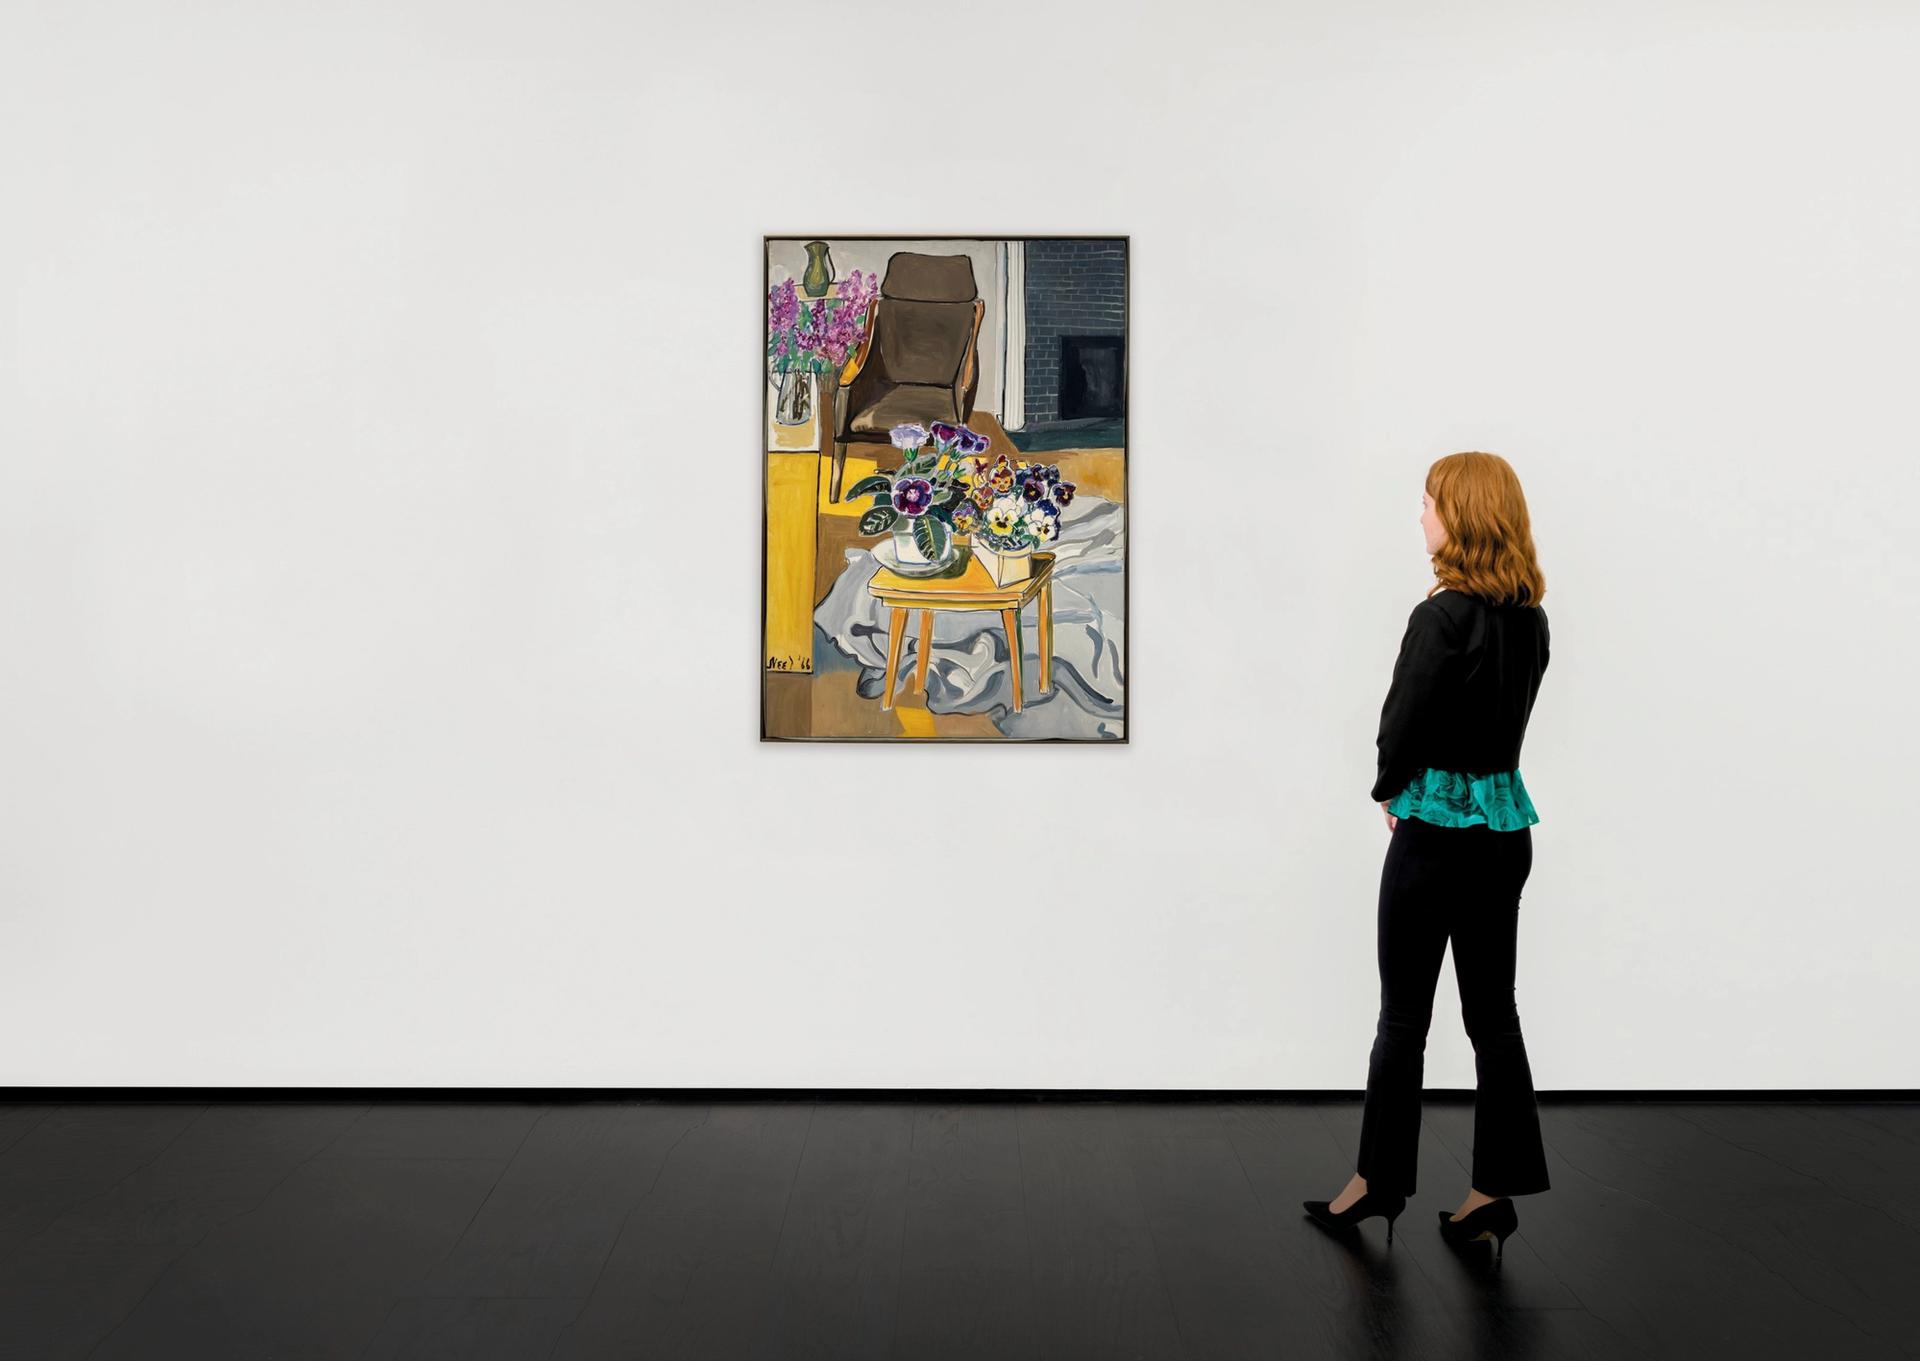 The first episode uses the record-breaking sale of Alice Neel’s 1966 painting, Dr Finger’s Waiting Room, for $2.5m (including buyer’s fees) at Christie’s this May